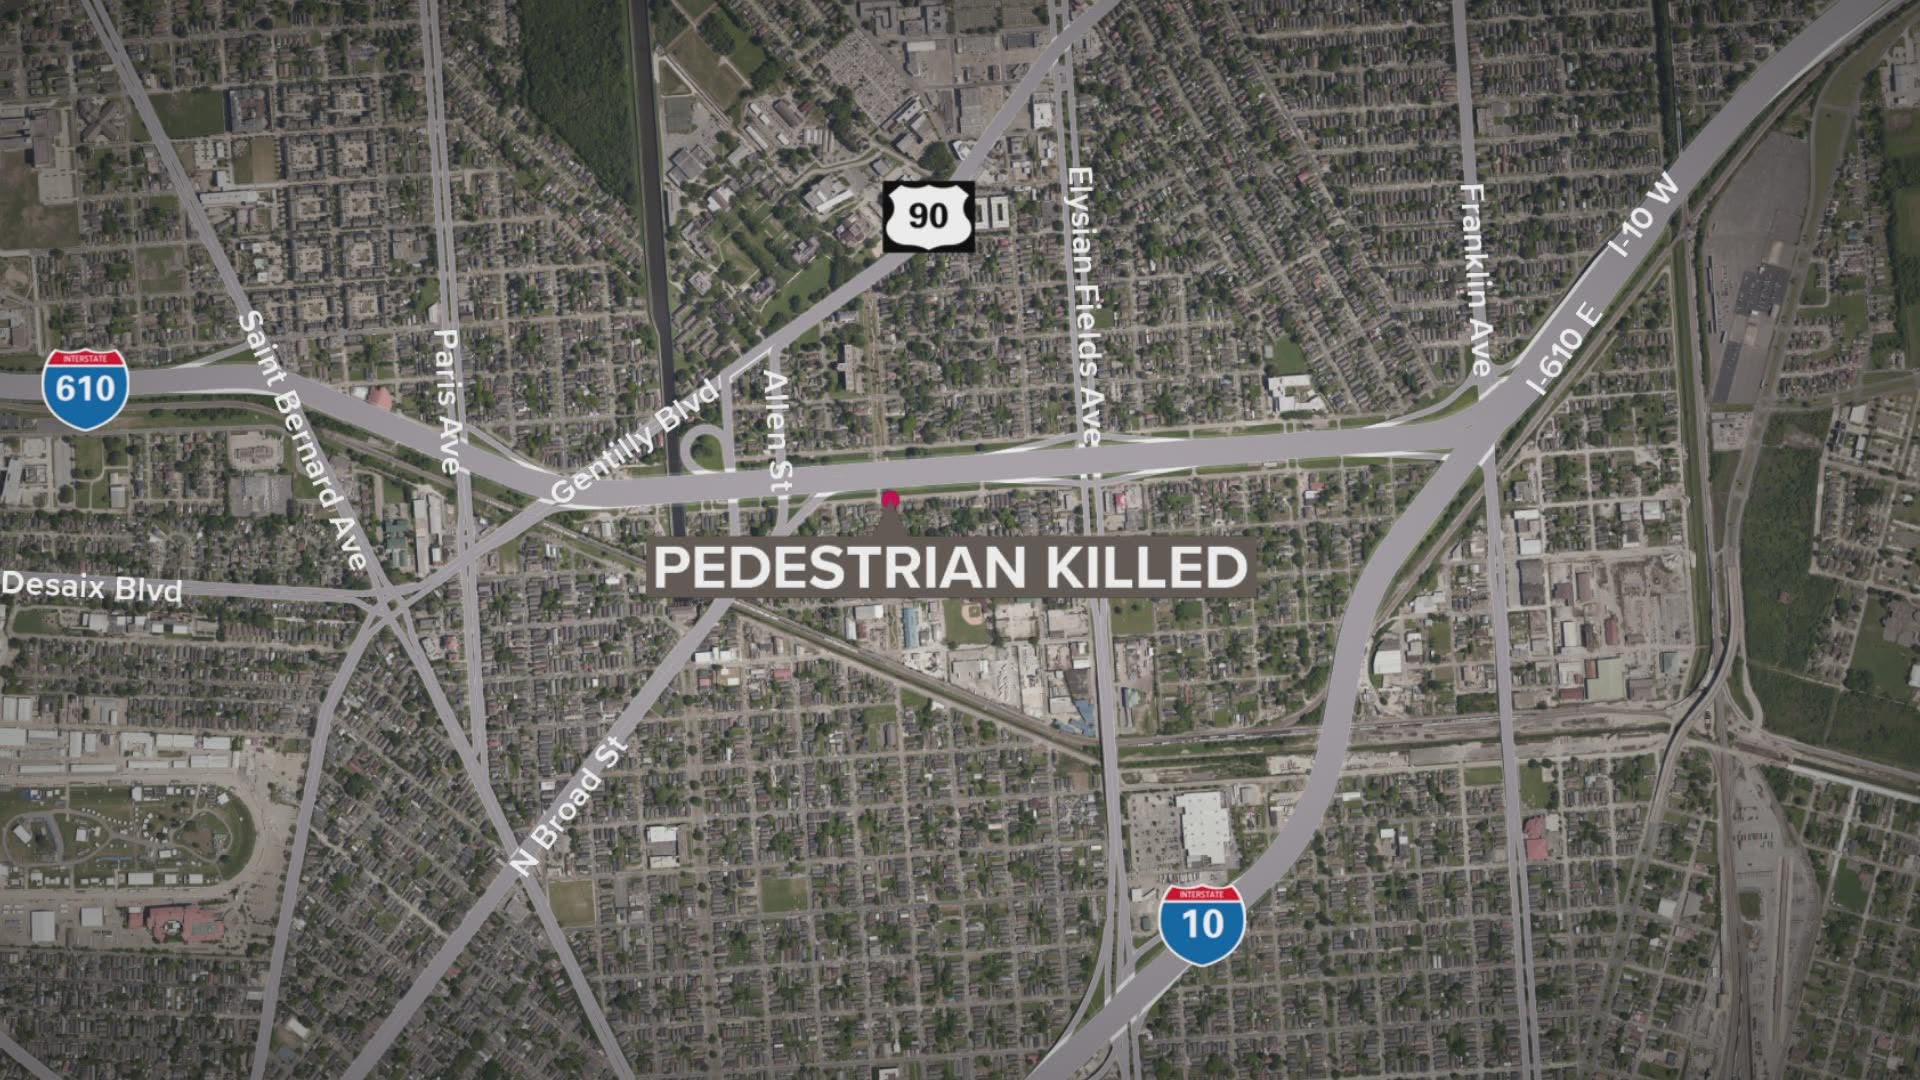 Two people were wounded in a shooting and one person was struck and killed by a car overnight in New Orleans